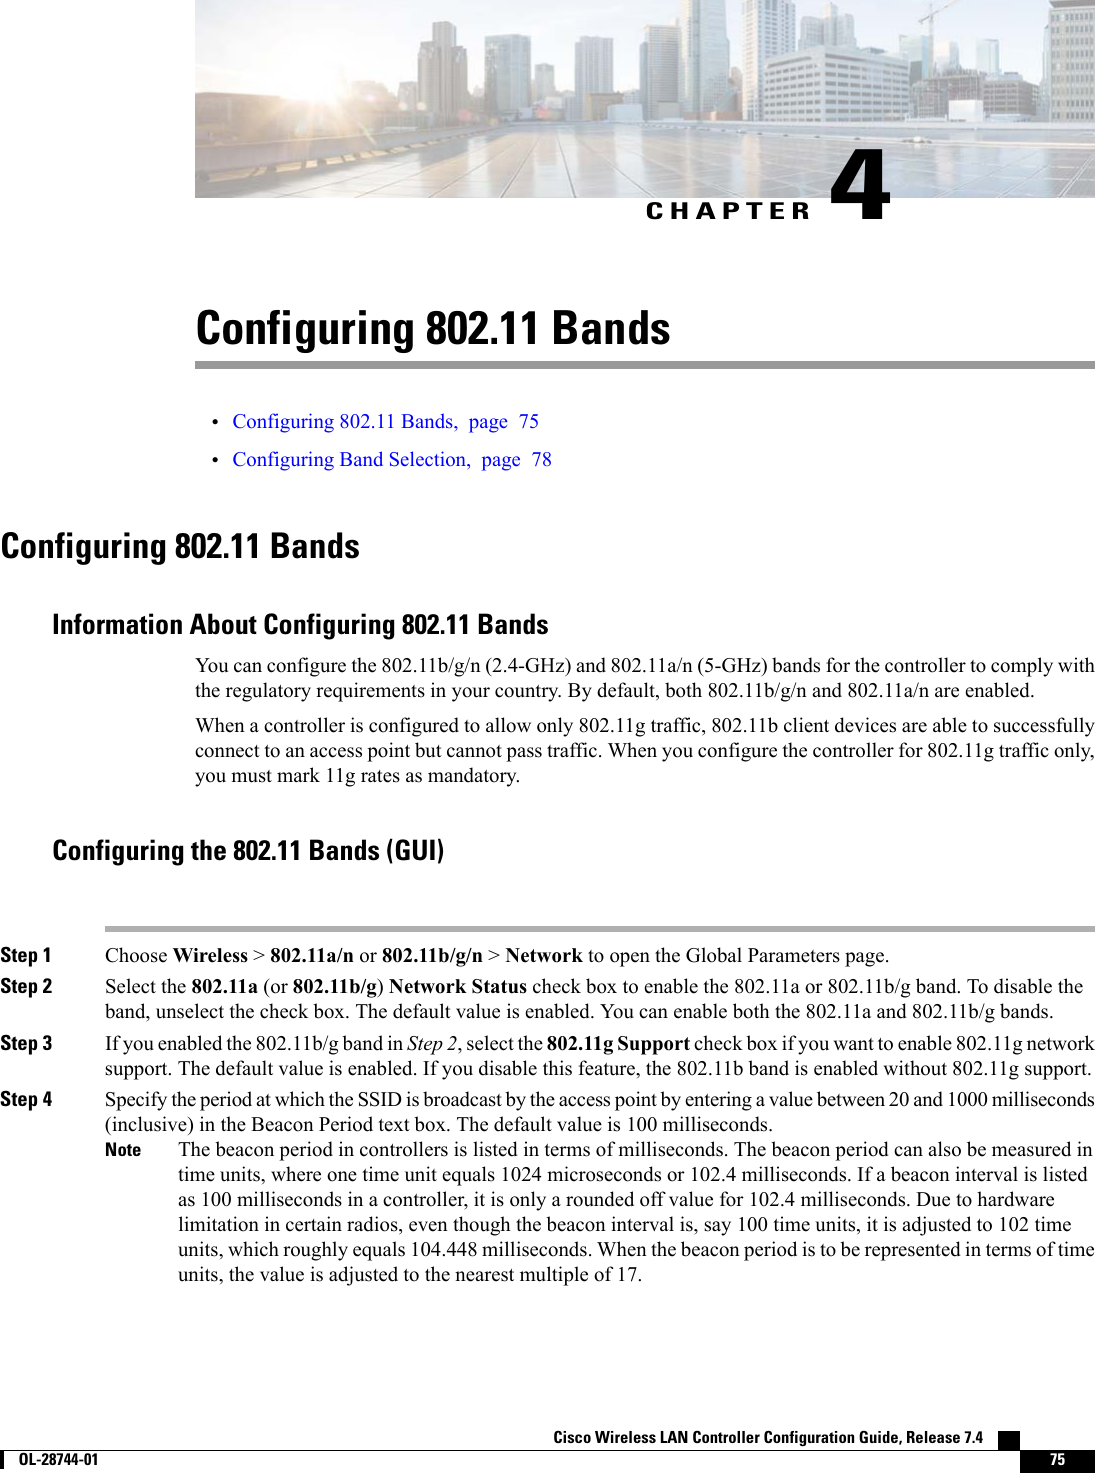 CHAPTER 4Configuring 802.11 Bands•Configuring 802.11 Bands, page 75•Configuring Band Selection, page 78Configuring 802.11 BandsInformation About Configuring 802.11 BandsYou can configure the 802.11b/g/n (2.4-GHz) and 802.11a/n (5-GHz) bands for the controller to comply withthe regulatory requirements in your country. By default, both 802.11b/g/n and 802.11a/n are enabled.When a controller is configured to allow only 802.11g traffic, 802.11b client devices are able to successfullyconnect to an access point but cannot pass traffic. When you configure the controller for 802.11g traffic only,you must mark 11g rates as mandatory.Configuring the 802.11 Bands (GUI)Step 1 Choose Wireless &gt;802.11a/n or 802.11b/g/n &gt;Network to open the Global Parameters page.Step 2 Select the 802.11a (or 802.11b/g)Network Status check box to enable the 802.11a or 802.11b/g band. To disable theband, unselect the check box. The default value is enabled. You can enable both the 802.11a and 802.11b/g bands.Step 3 If you enabled the 802.11b/g band in Step 2, select the 802.11g Support check box if you want to enable 802.11g networksupport. The default value is enabled. If you disable this feature, the 802.11b band is enabled without 802.11g support.Step 4 Specify the period at which the SSID is broadcast by the access point by entering a value between 20 and 1000 milliseconds(inclusive) in the Beacon Period text box. The default value is 100 milliseconds.The beacon period in controllers is listed in terms of milliseconds. The beacon period can also be measured intime units, where one time unit equals 1024 microseconds or 102.4 milliseconds. If a beacon interval is listedas 100 milliseconds in a controller, it is only a rounded off value for 102.4 milliseconds. Due to hardwarelimitation in certain radios, even though the beacon interval is, say 100 time units, it is adjusted to 102 timeunits, which roughly equals 104.448 milliseconds. When the beacon period is to be represented in terms of timeunits, the value is adjusted to the nearest multiple of 17.NoteCisco Wireless LAN Controller Configuration Guide, Release 7.4        OL-28744-01 75